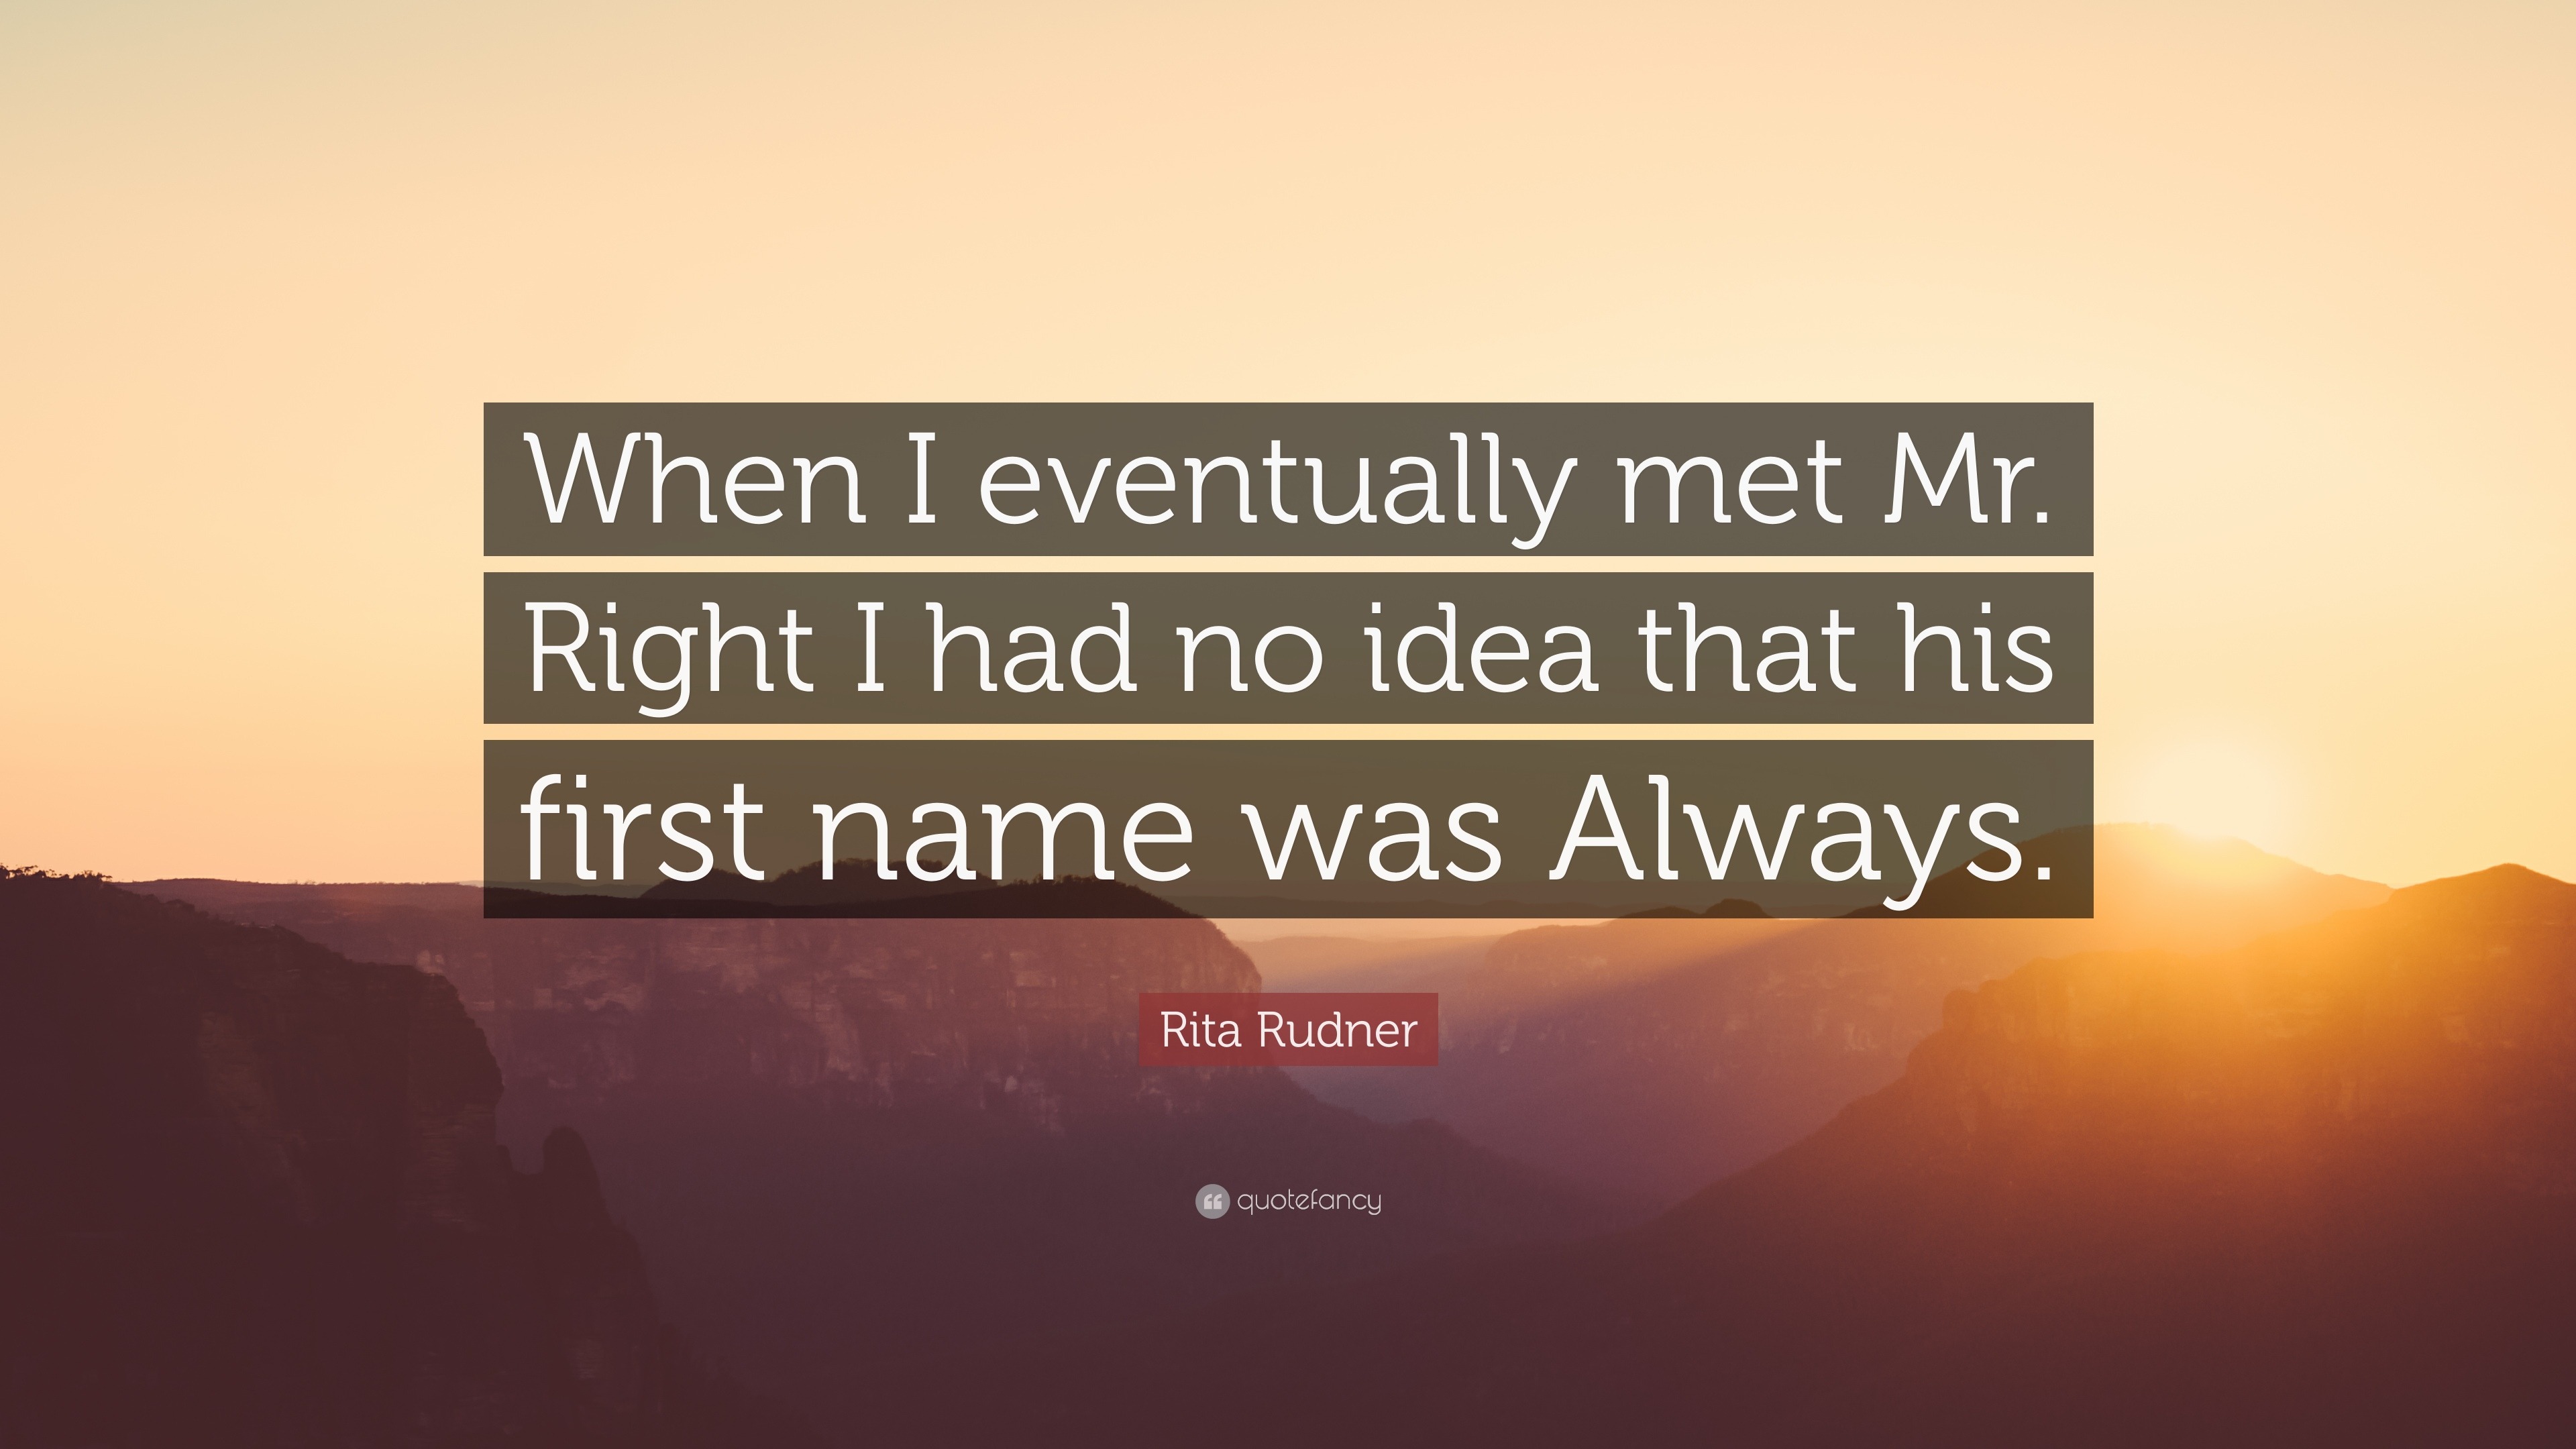 Rita Rudner Quote: "When I eventually met Mr. Right I had no idea that his first name was Always ...